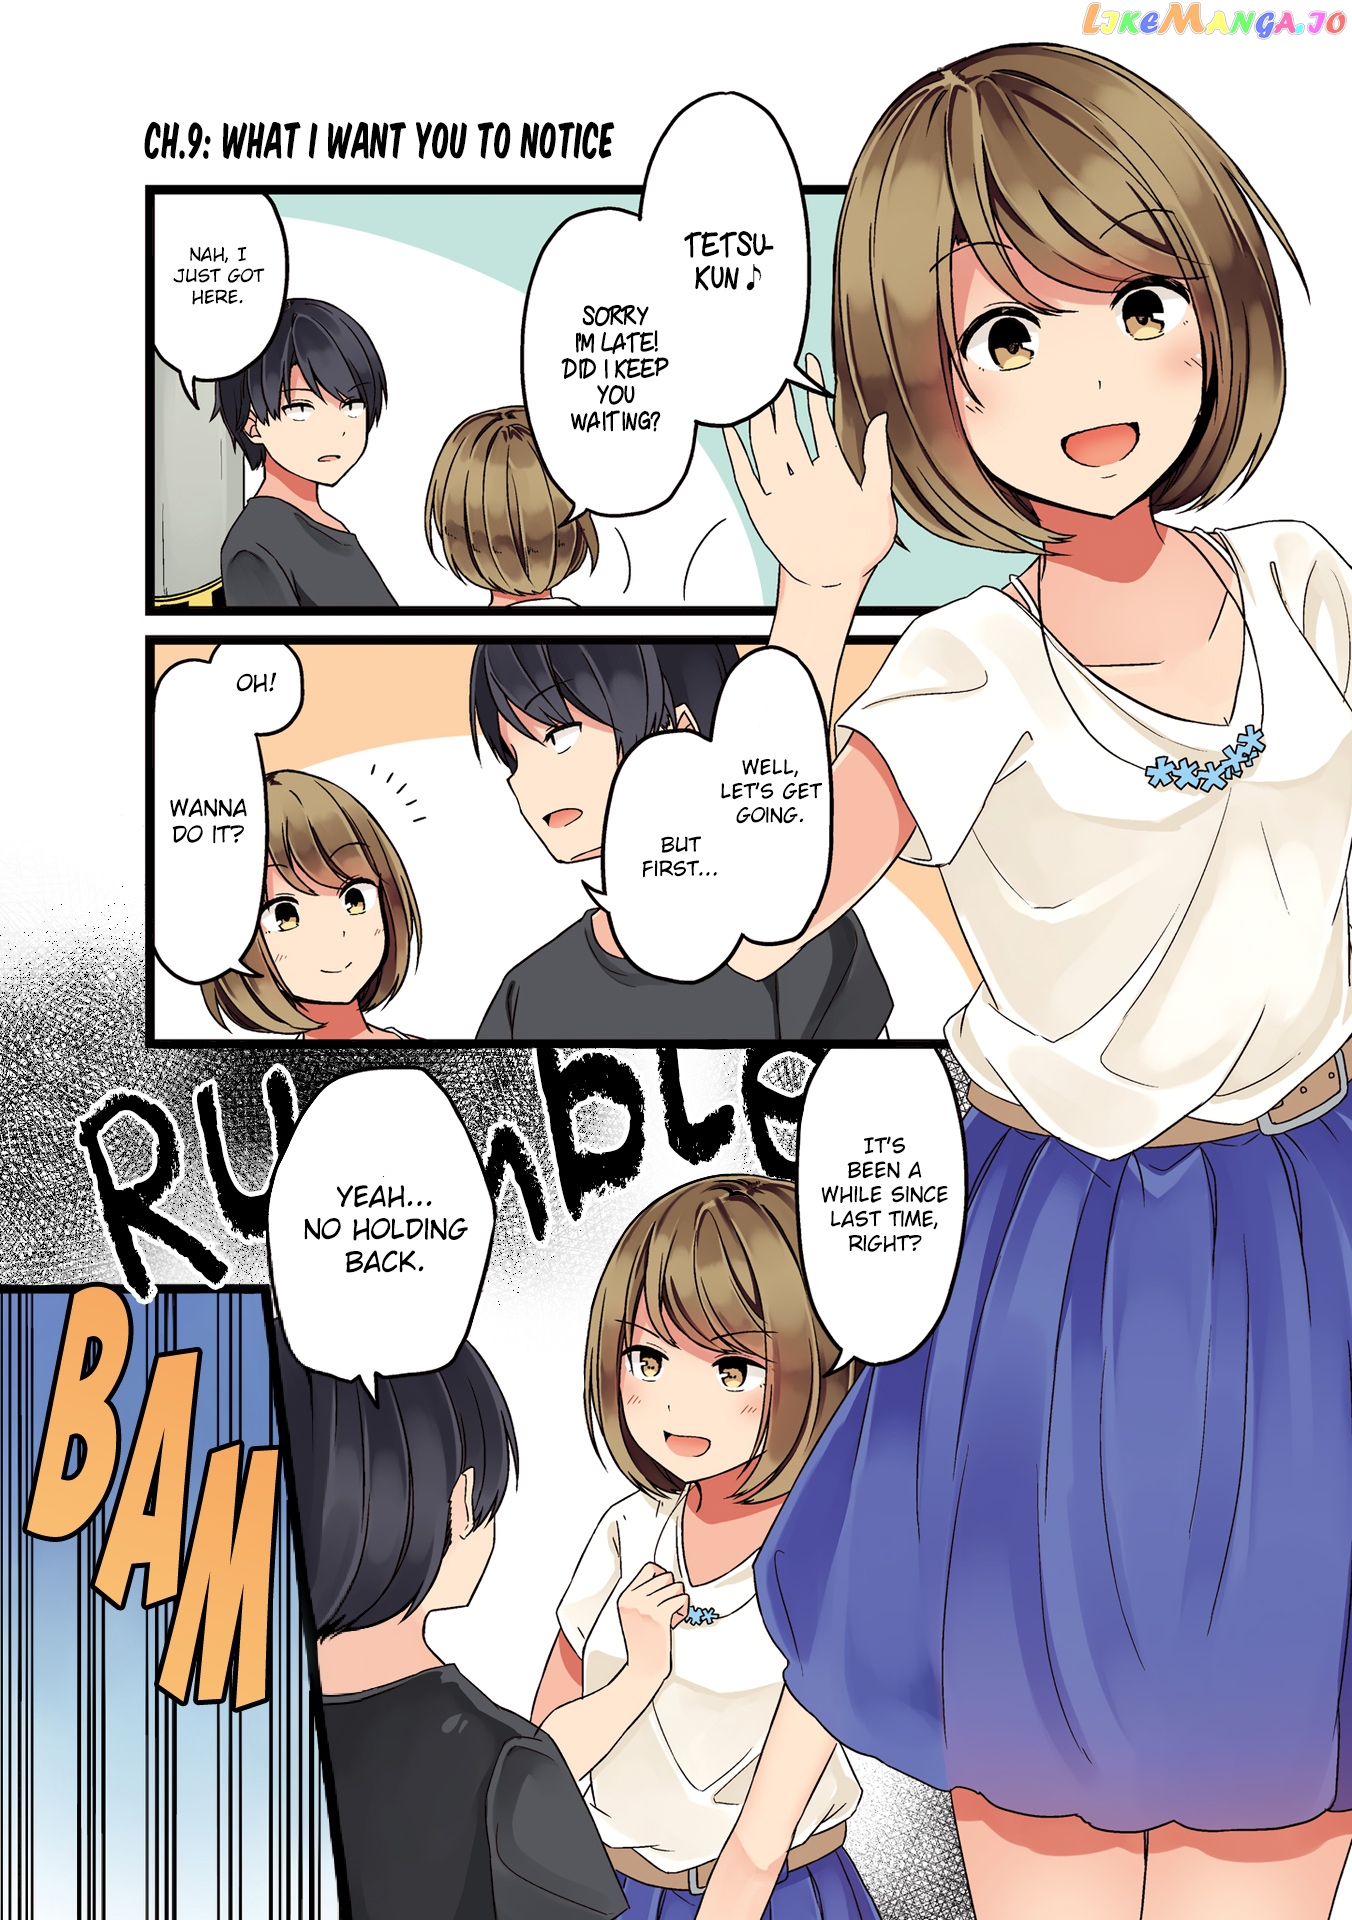 First Comes Love, Then Comes Marriage vol.1 chapter 9 - page 1